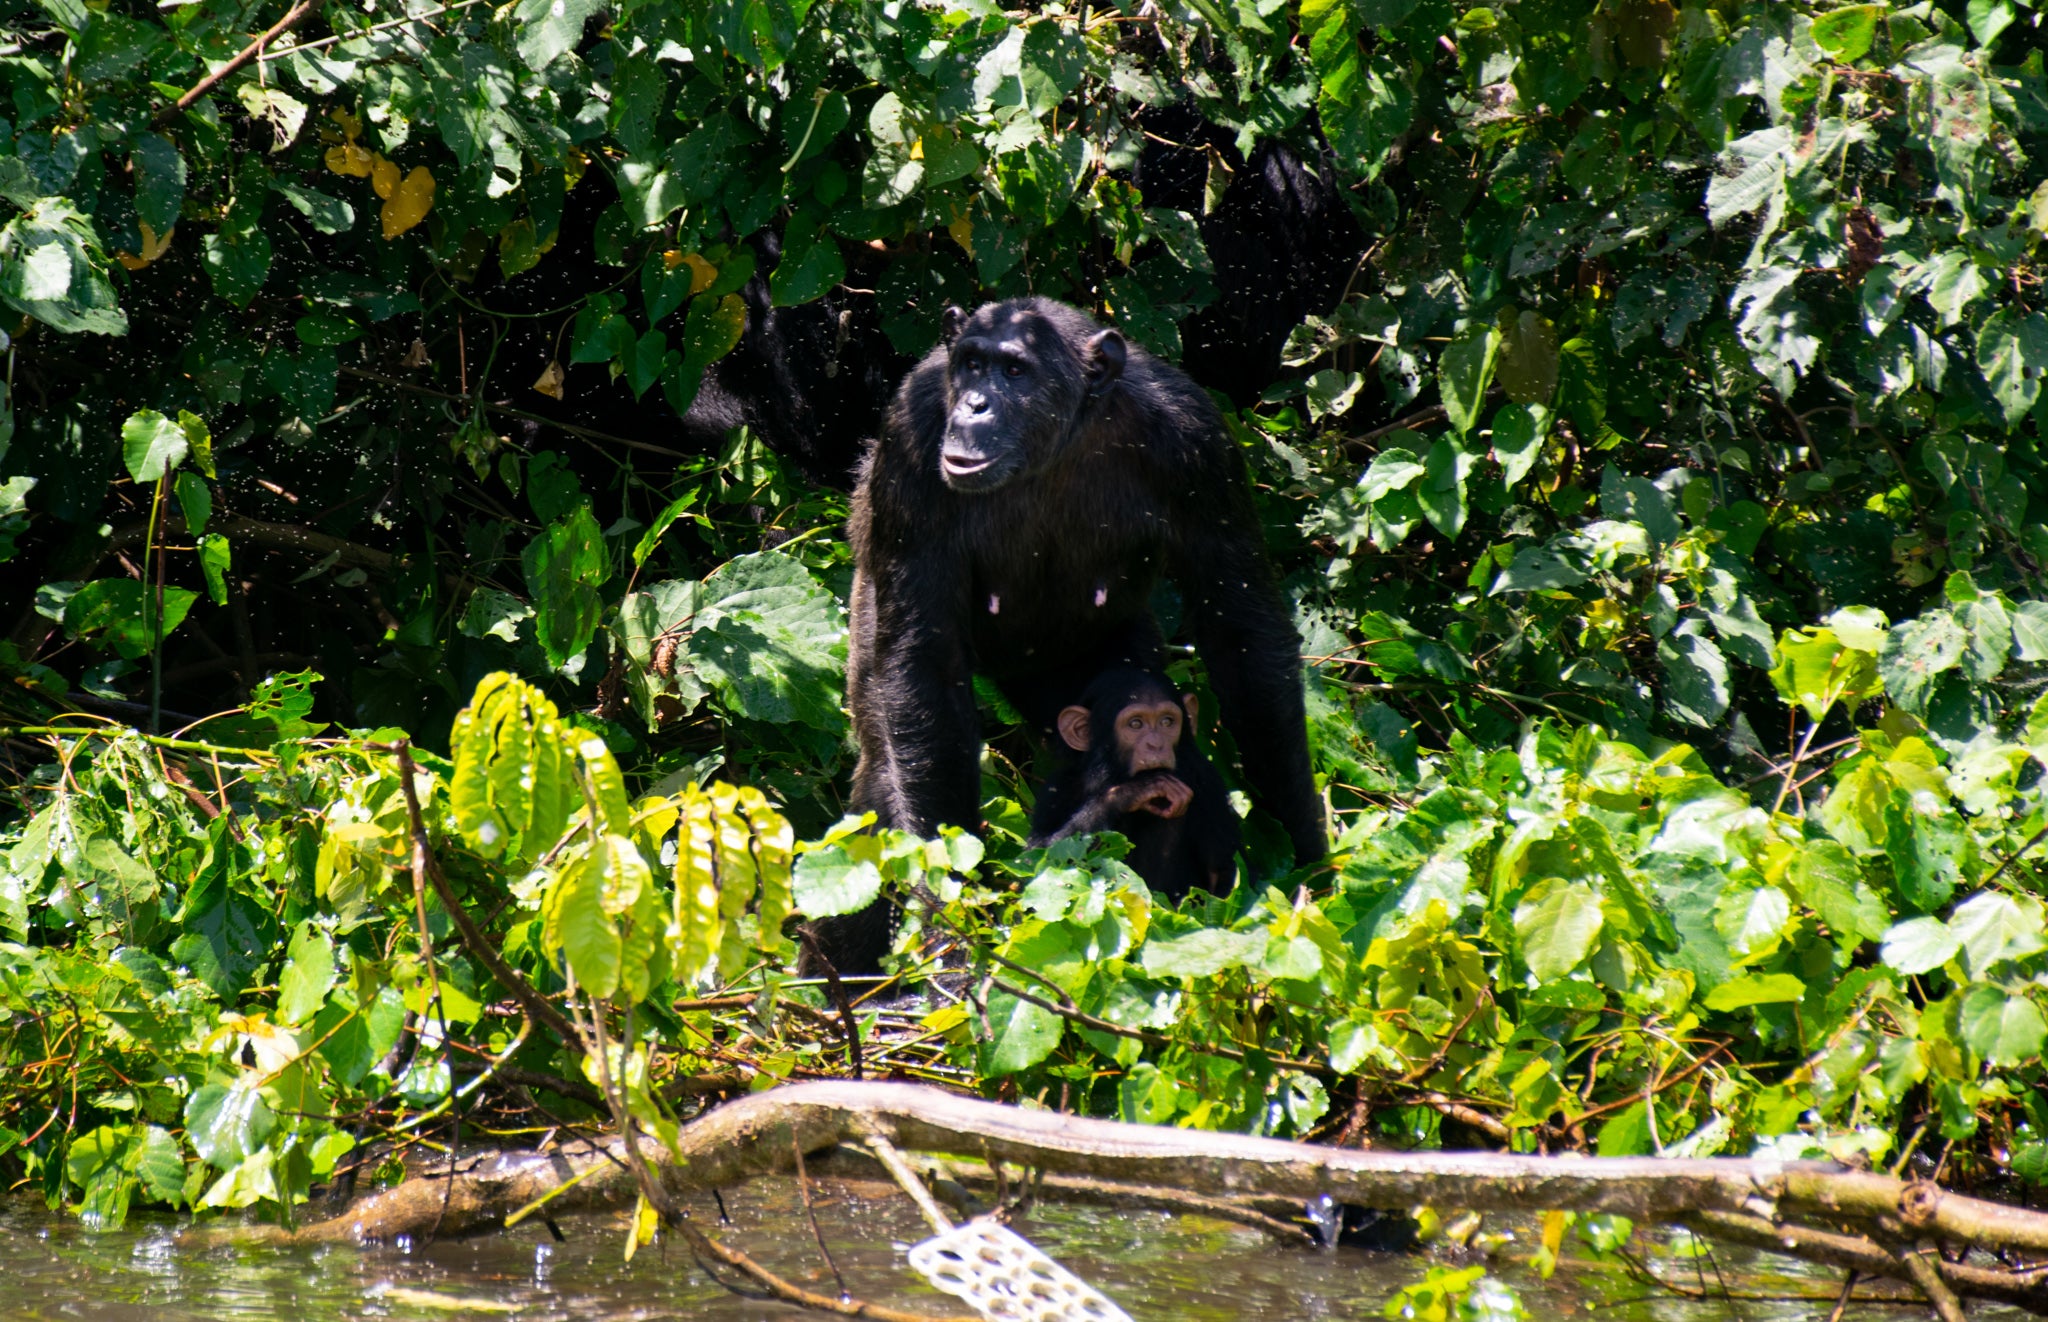 A chimp at the reserve